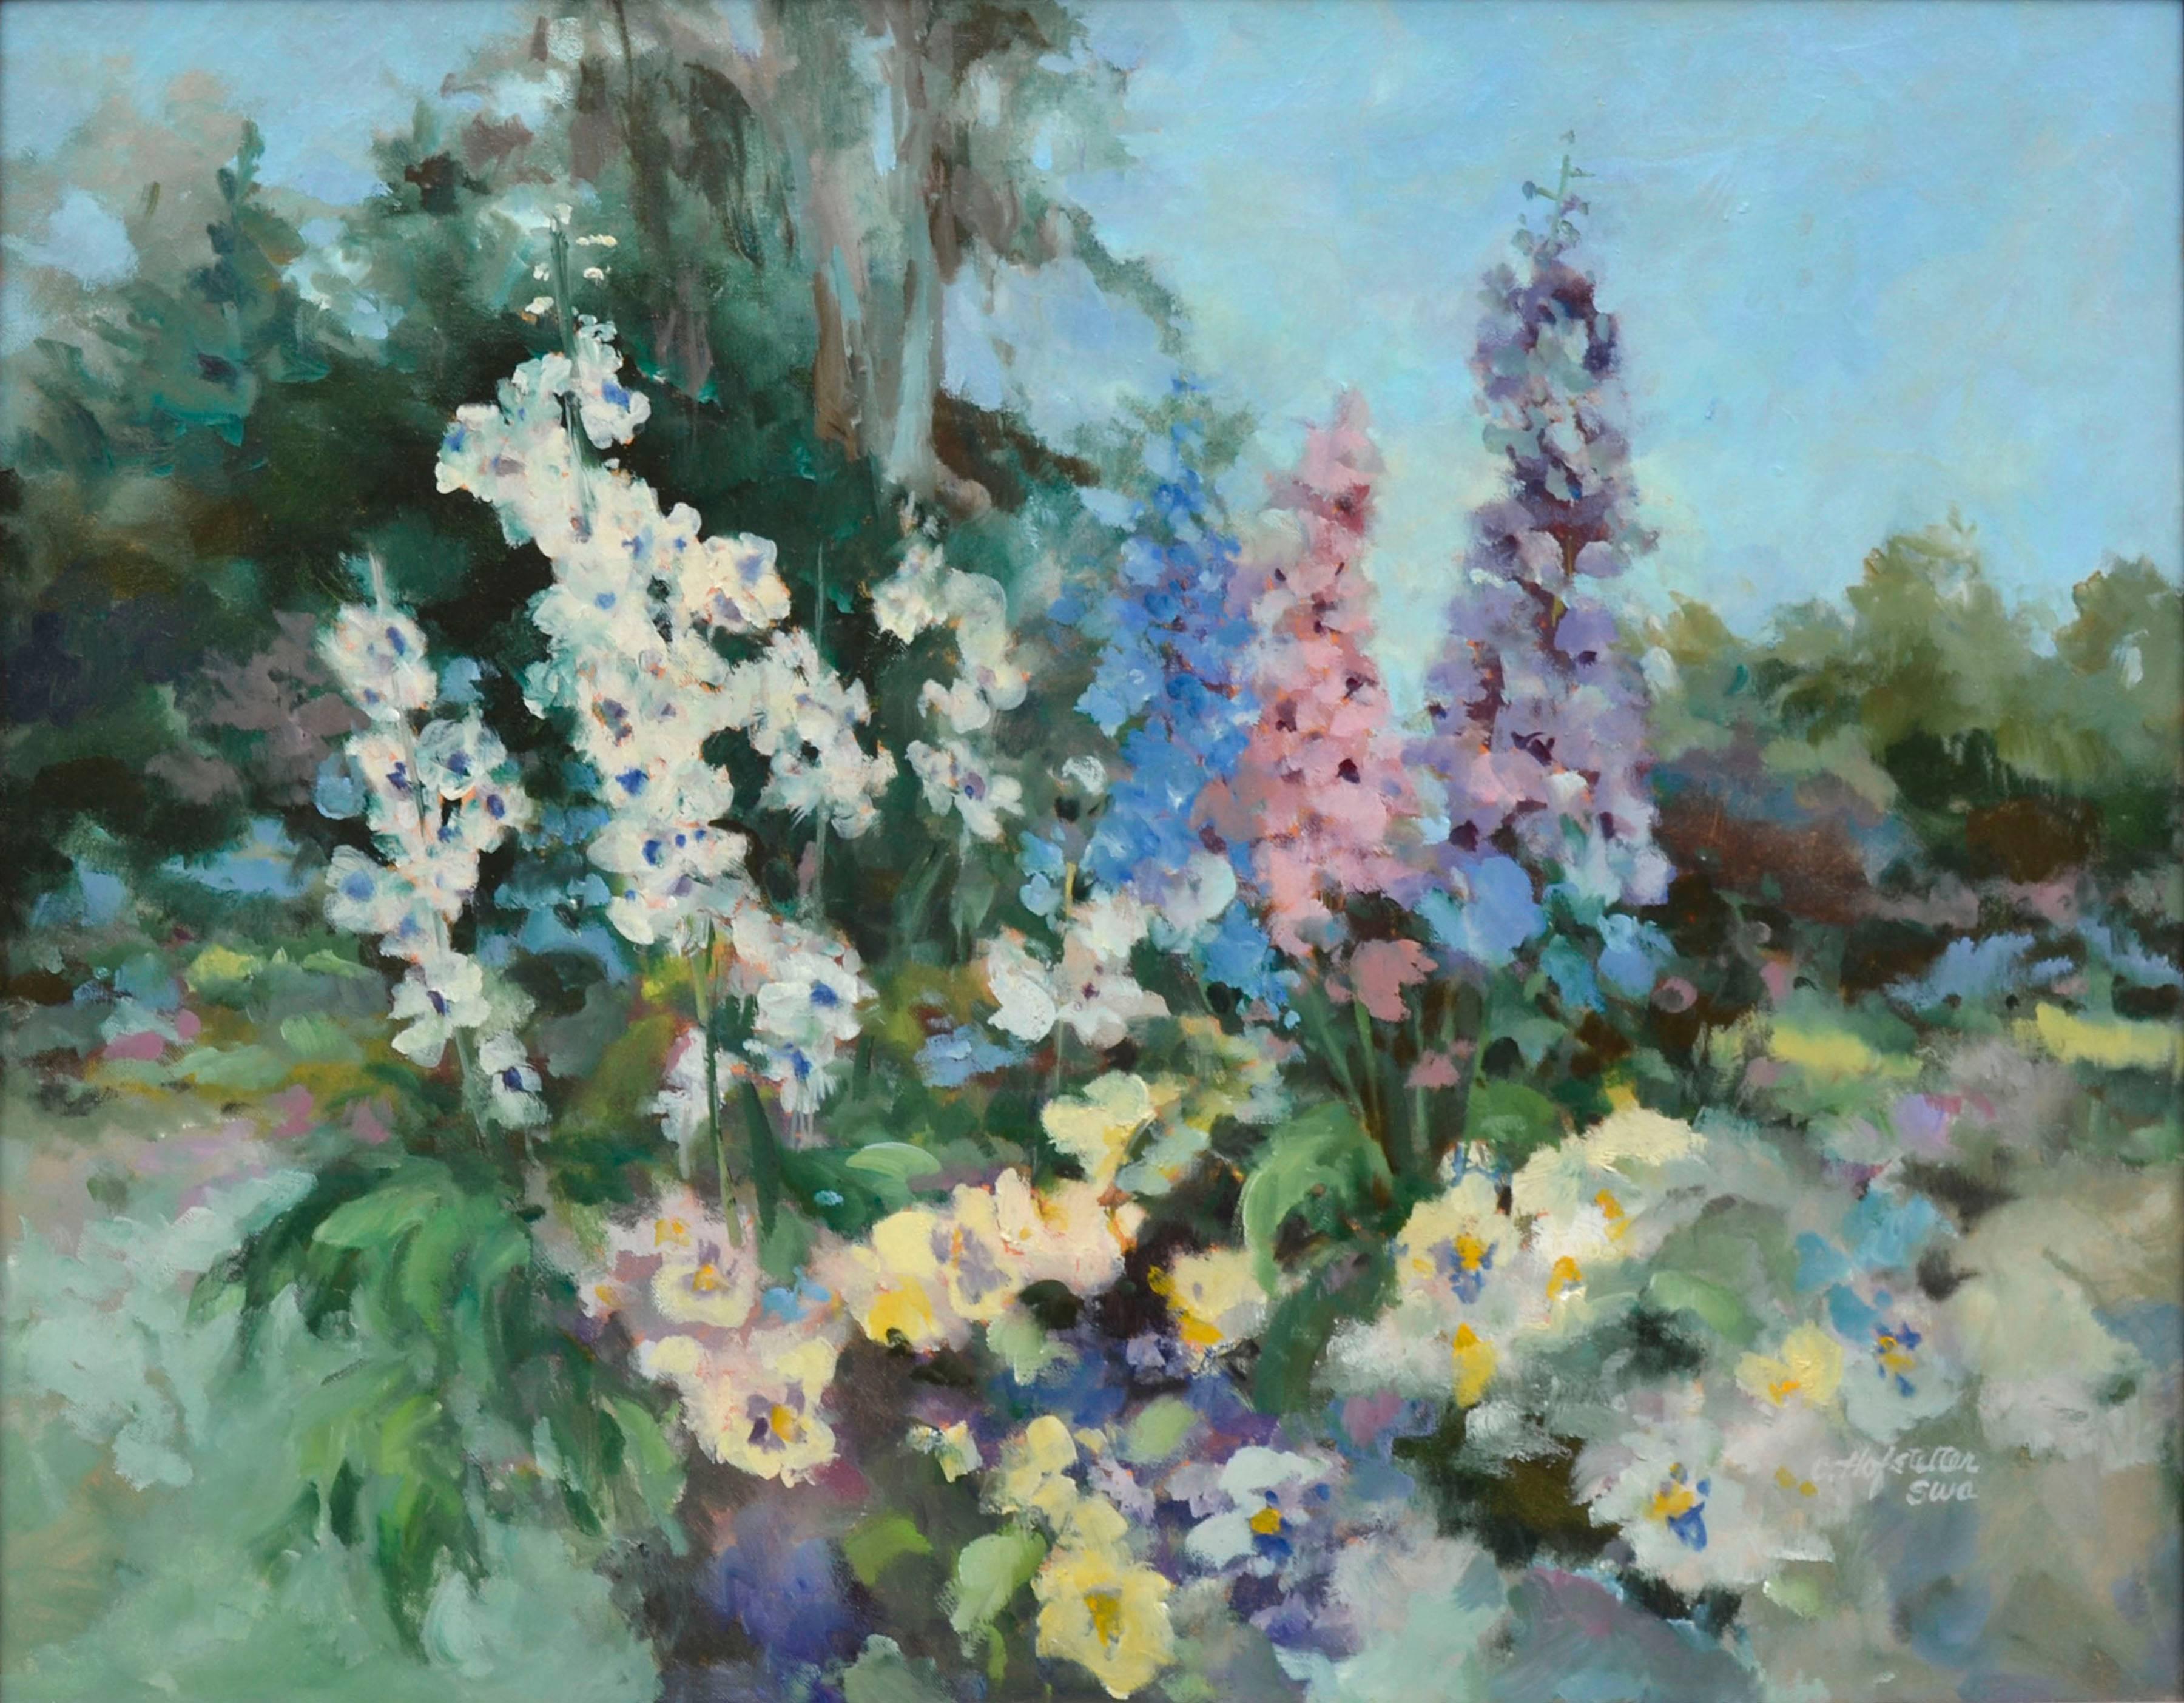 Garden in Bloom - Floral Landscape  - Painting by Carolyn Hofstetter